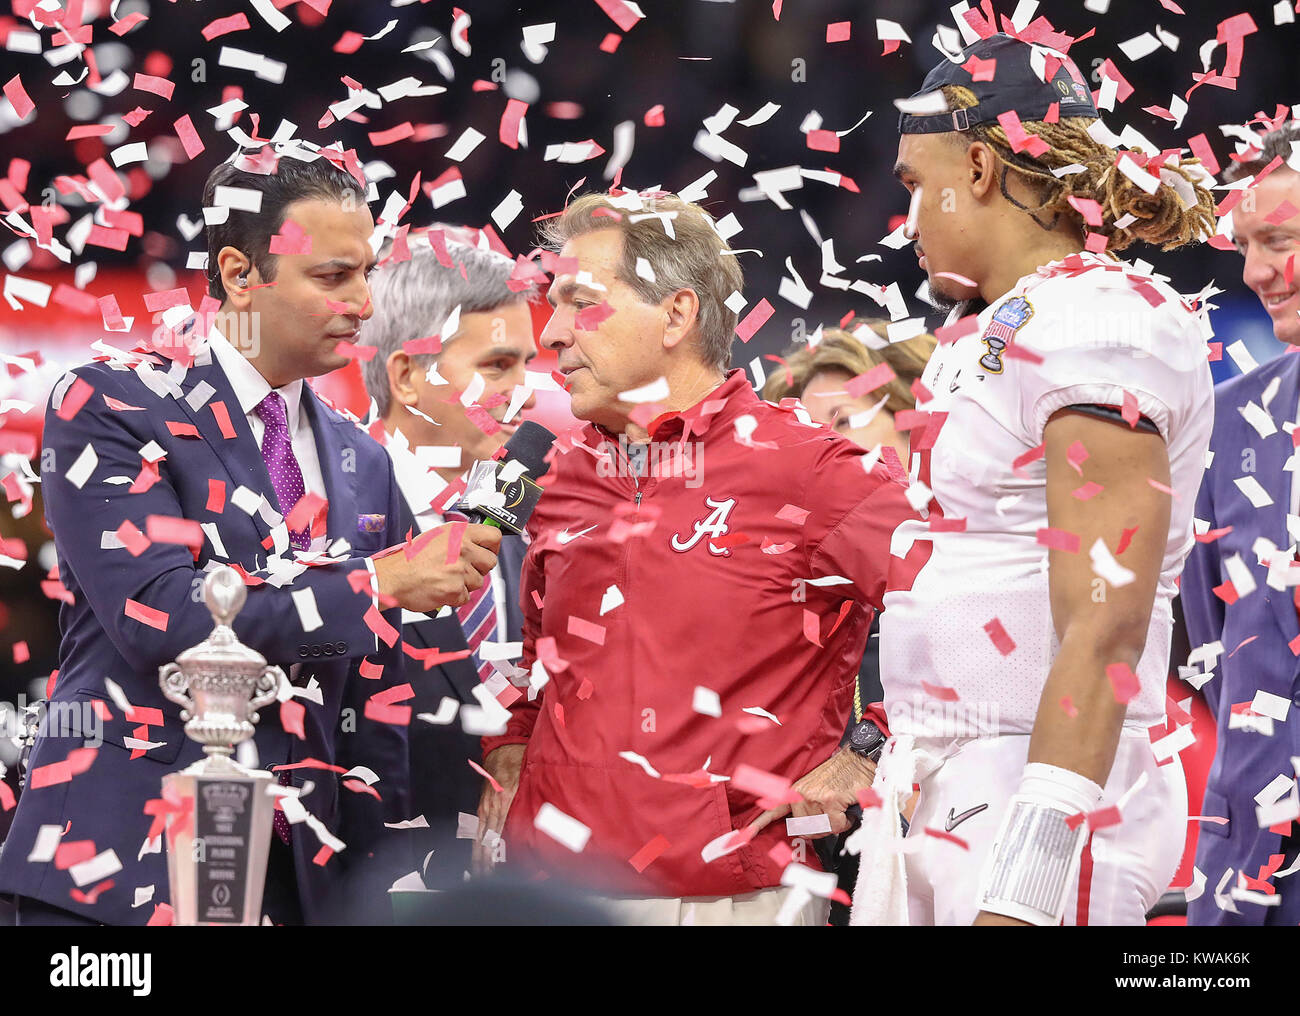 New Orleans, LA, USA. 1st Jan, 2018. Alabama Crimson Tide head coach Nick Saban is interviewed by ESPN analyst Joe Tessitore during the Allstate Sugar Bowl between the Alabama Crimson Tide and the Clemson Tigers at the Mercedes-Benz Superdome in New Orleans, La. John Glaser/CSM/Alamy Live News Stock Photo